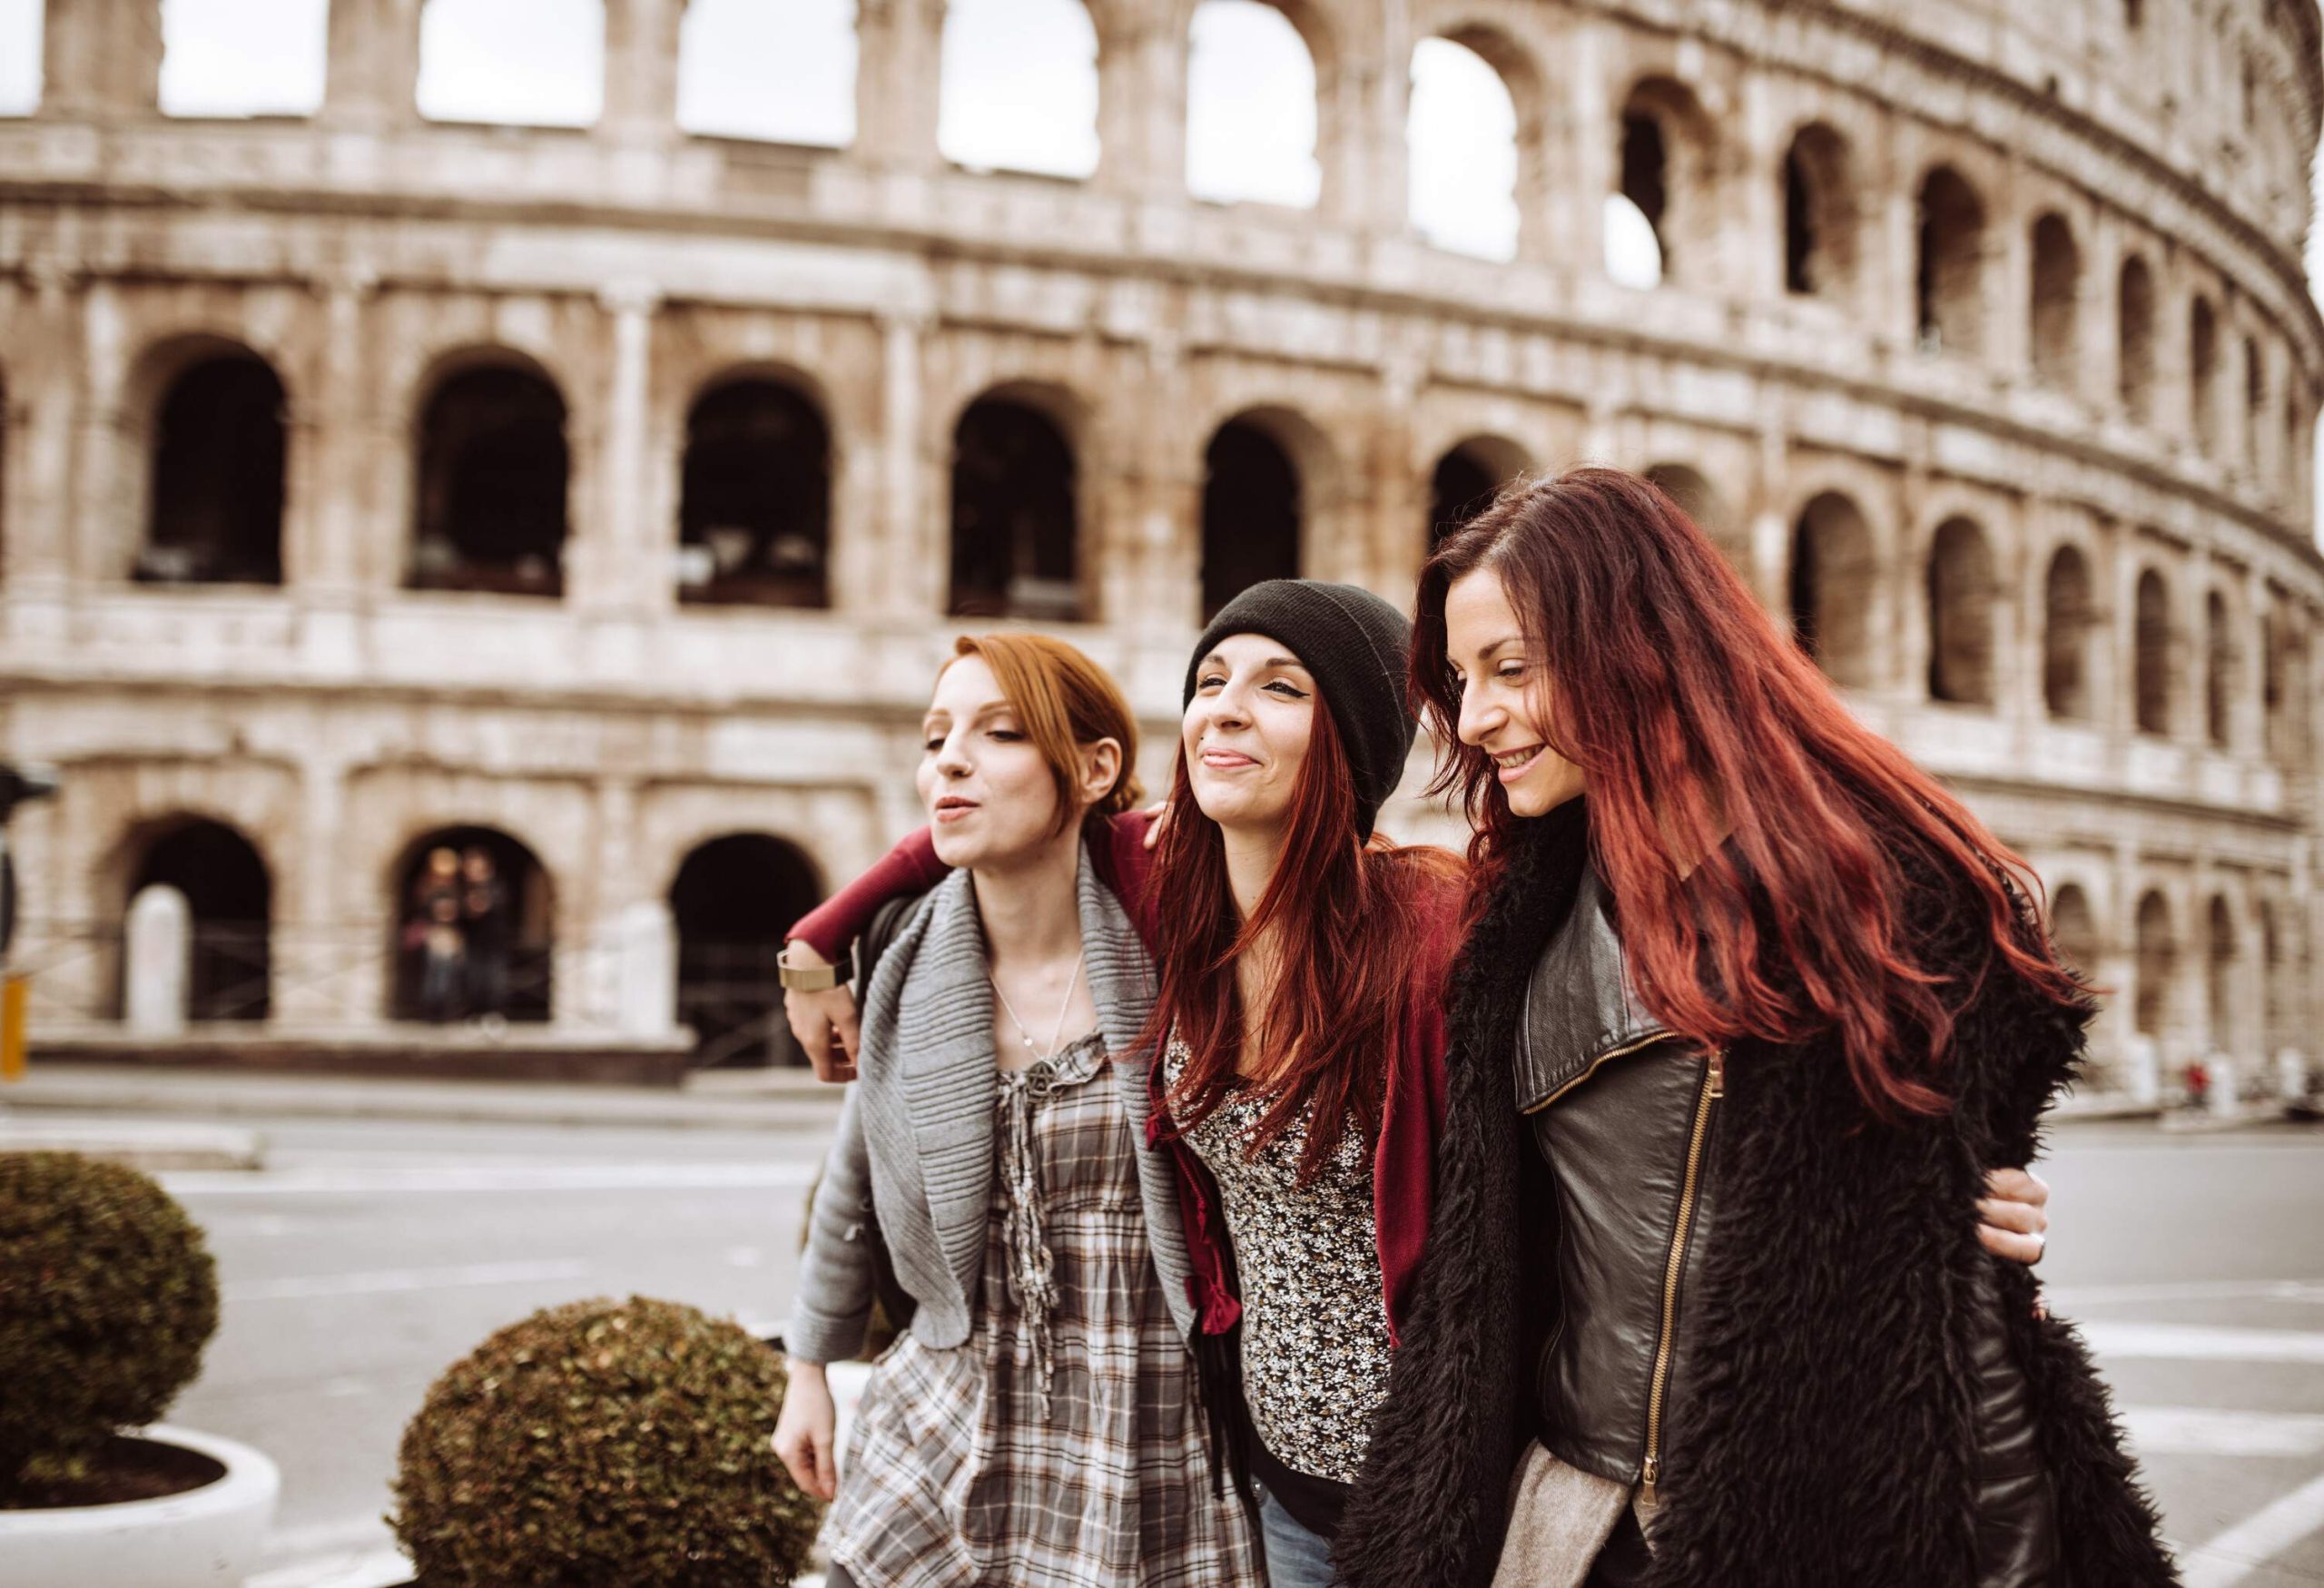 Tourists in winter clothing can be seen walking beside the iconic Roman Colosseum.